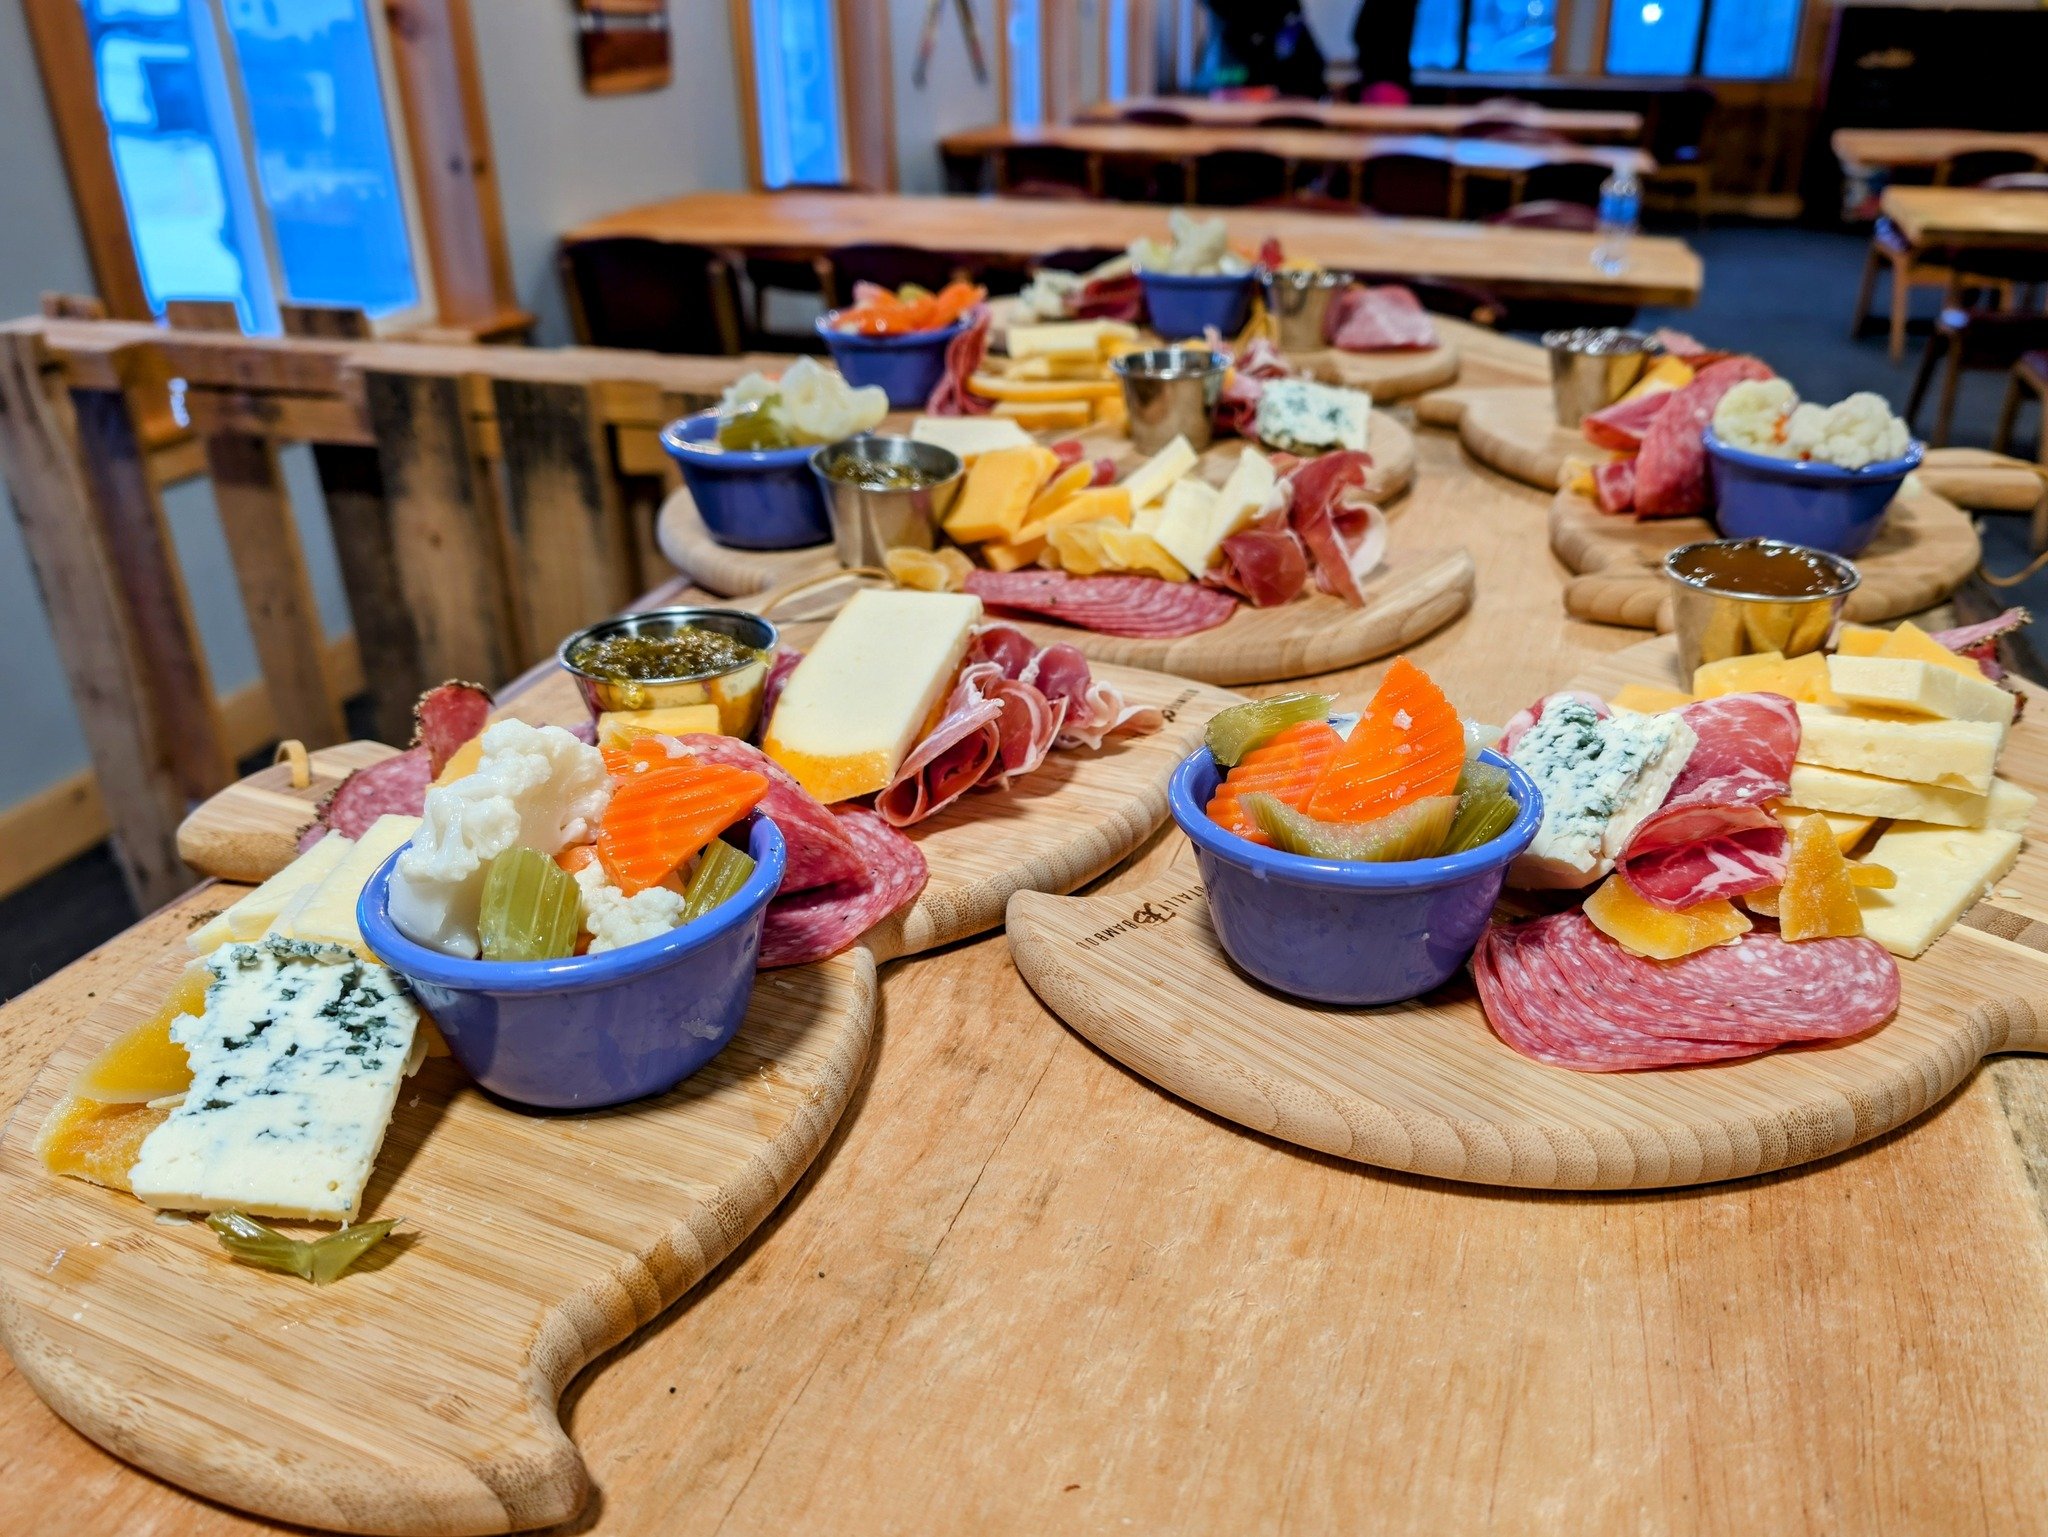 Have you had the pleasure of trying our Whaley Awesome Charcuterie boards? It is the perfect apr&egrave;s-ski treat.

Speaking of skiing, have you secured your season pass yet? 🎿❄️ Hit the link in our bio to grab yours before May 1st to lock in the 